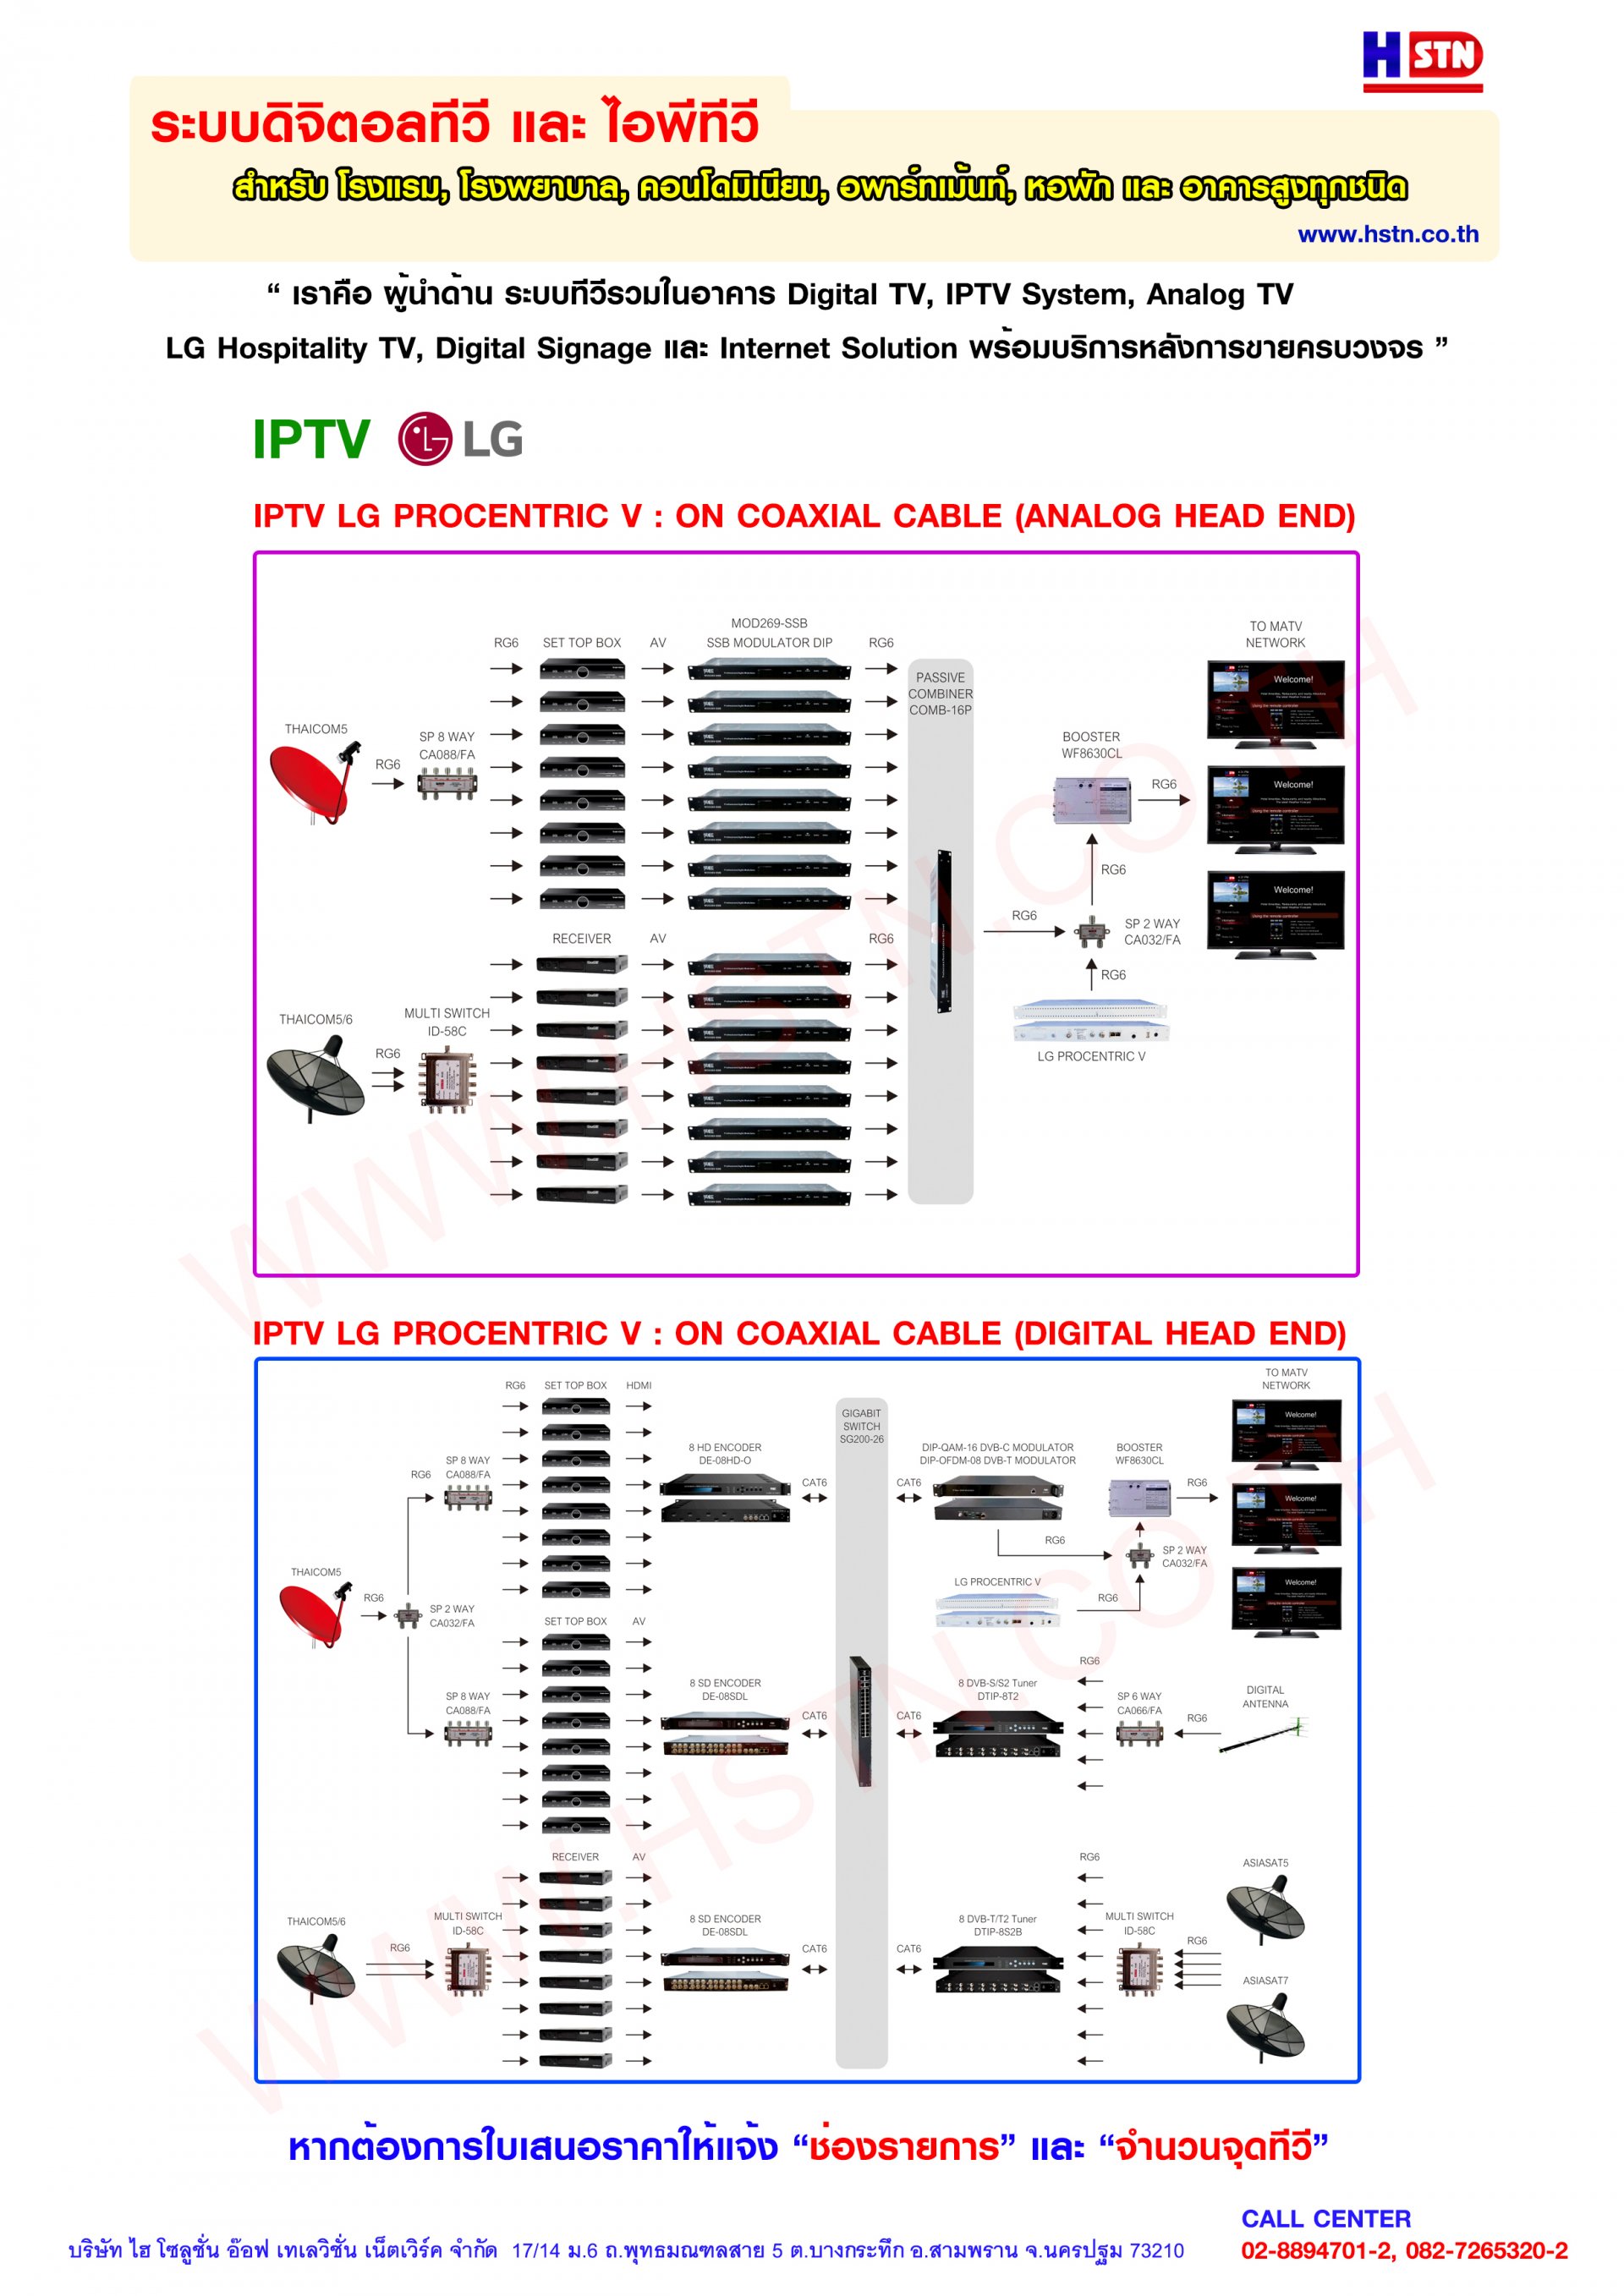 IPTV On Coaxial Cable โดย HSTN